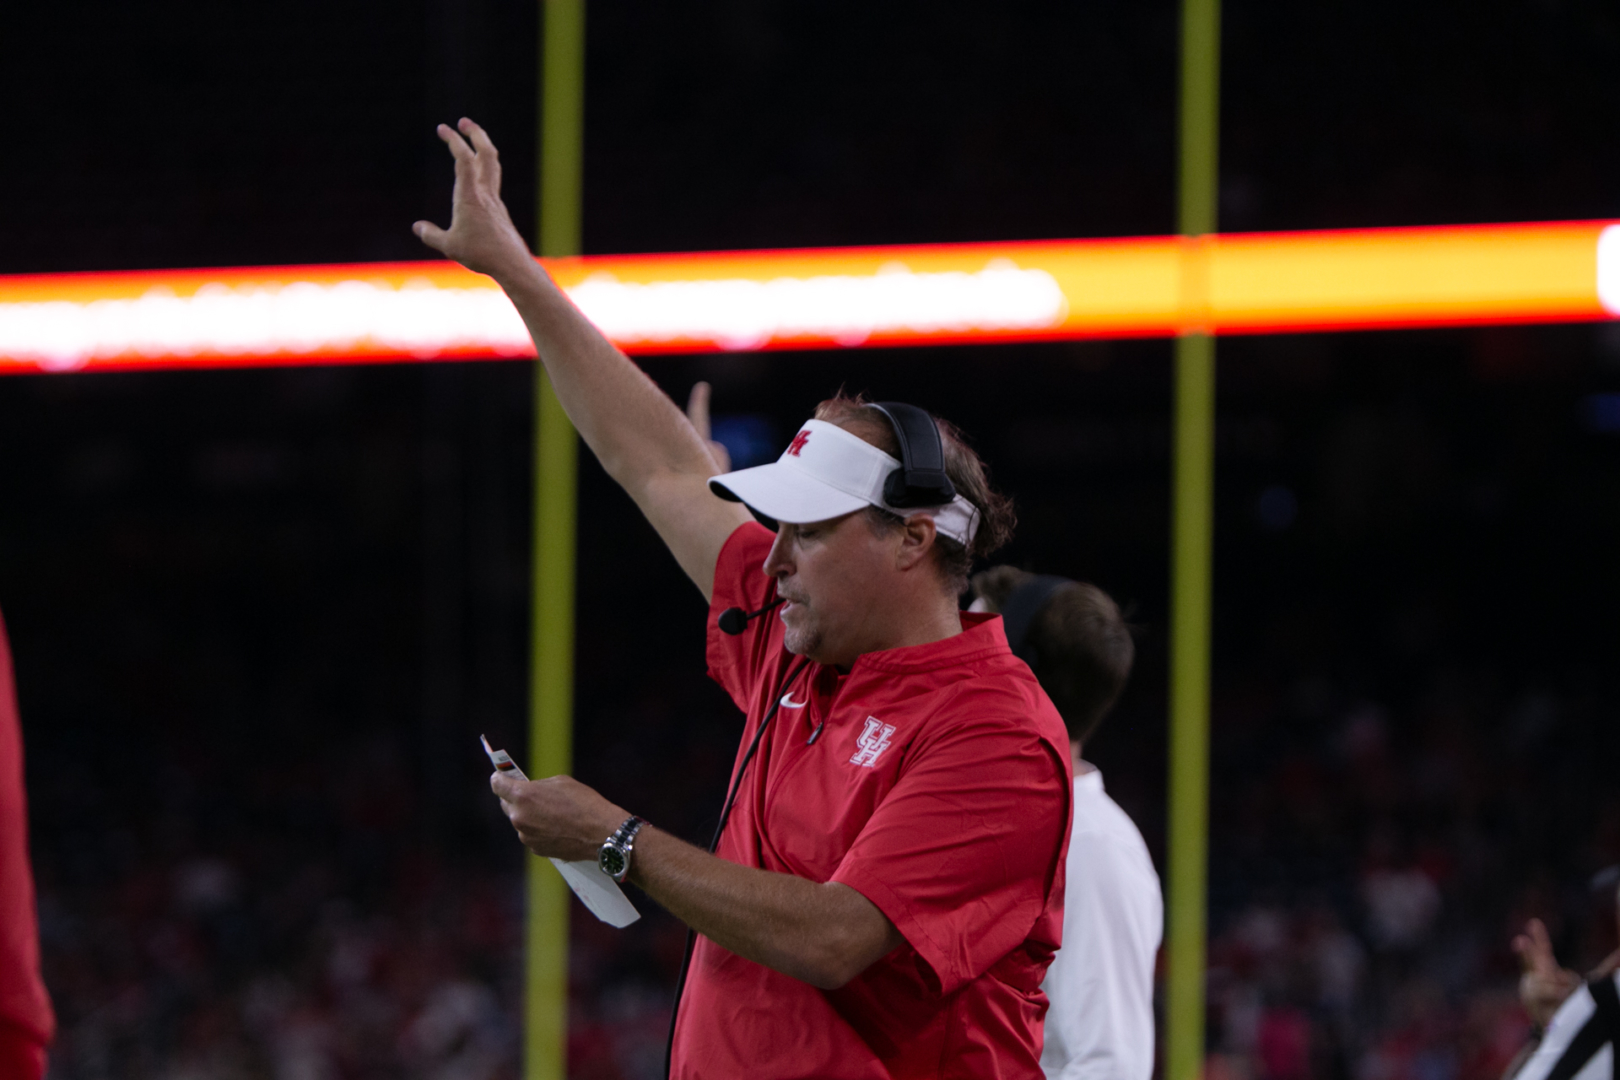 Head coach Dana Holgorsen admitted, "We have been underdogs in almost every game we played this year," and Houston "are underdogs again" versus No. 18 Memphis. | Kathryn Lenihan/The Cougar